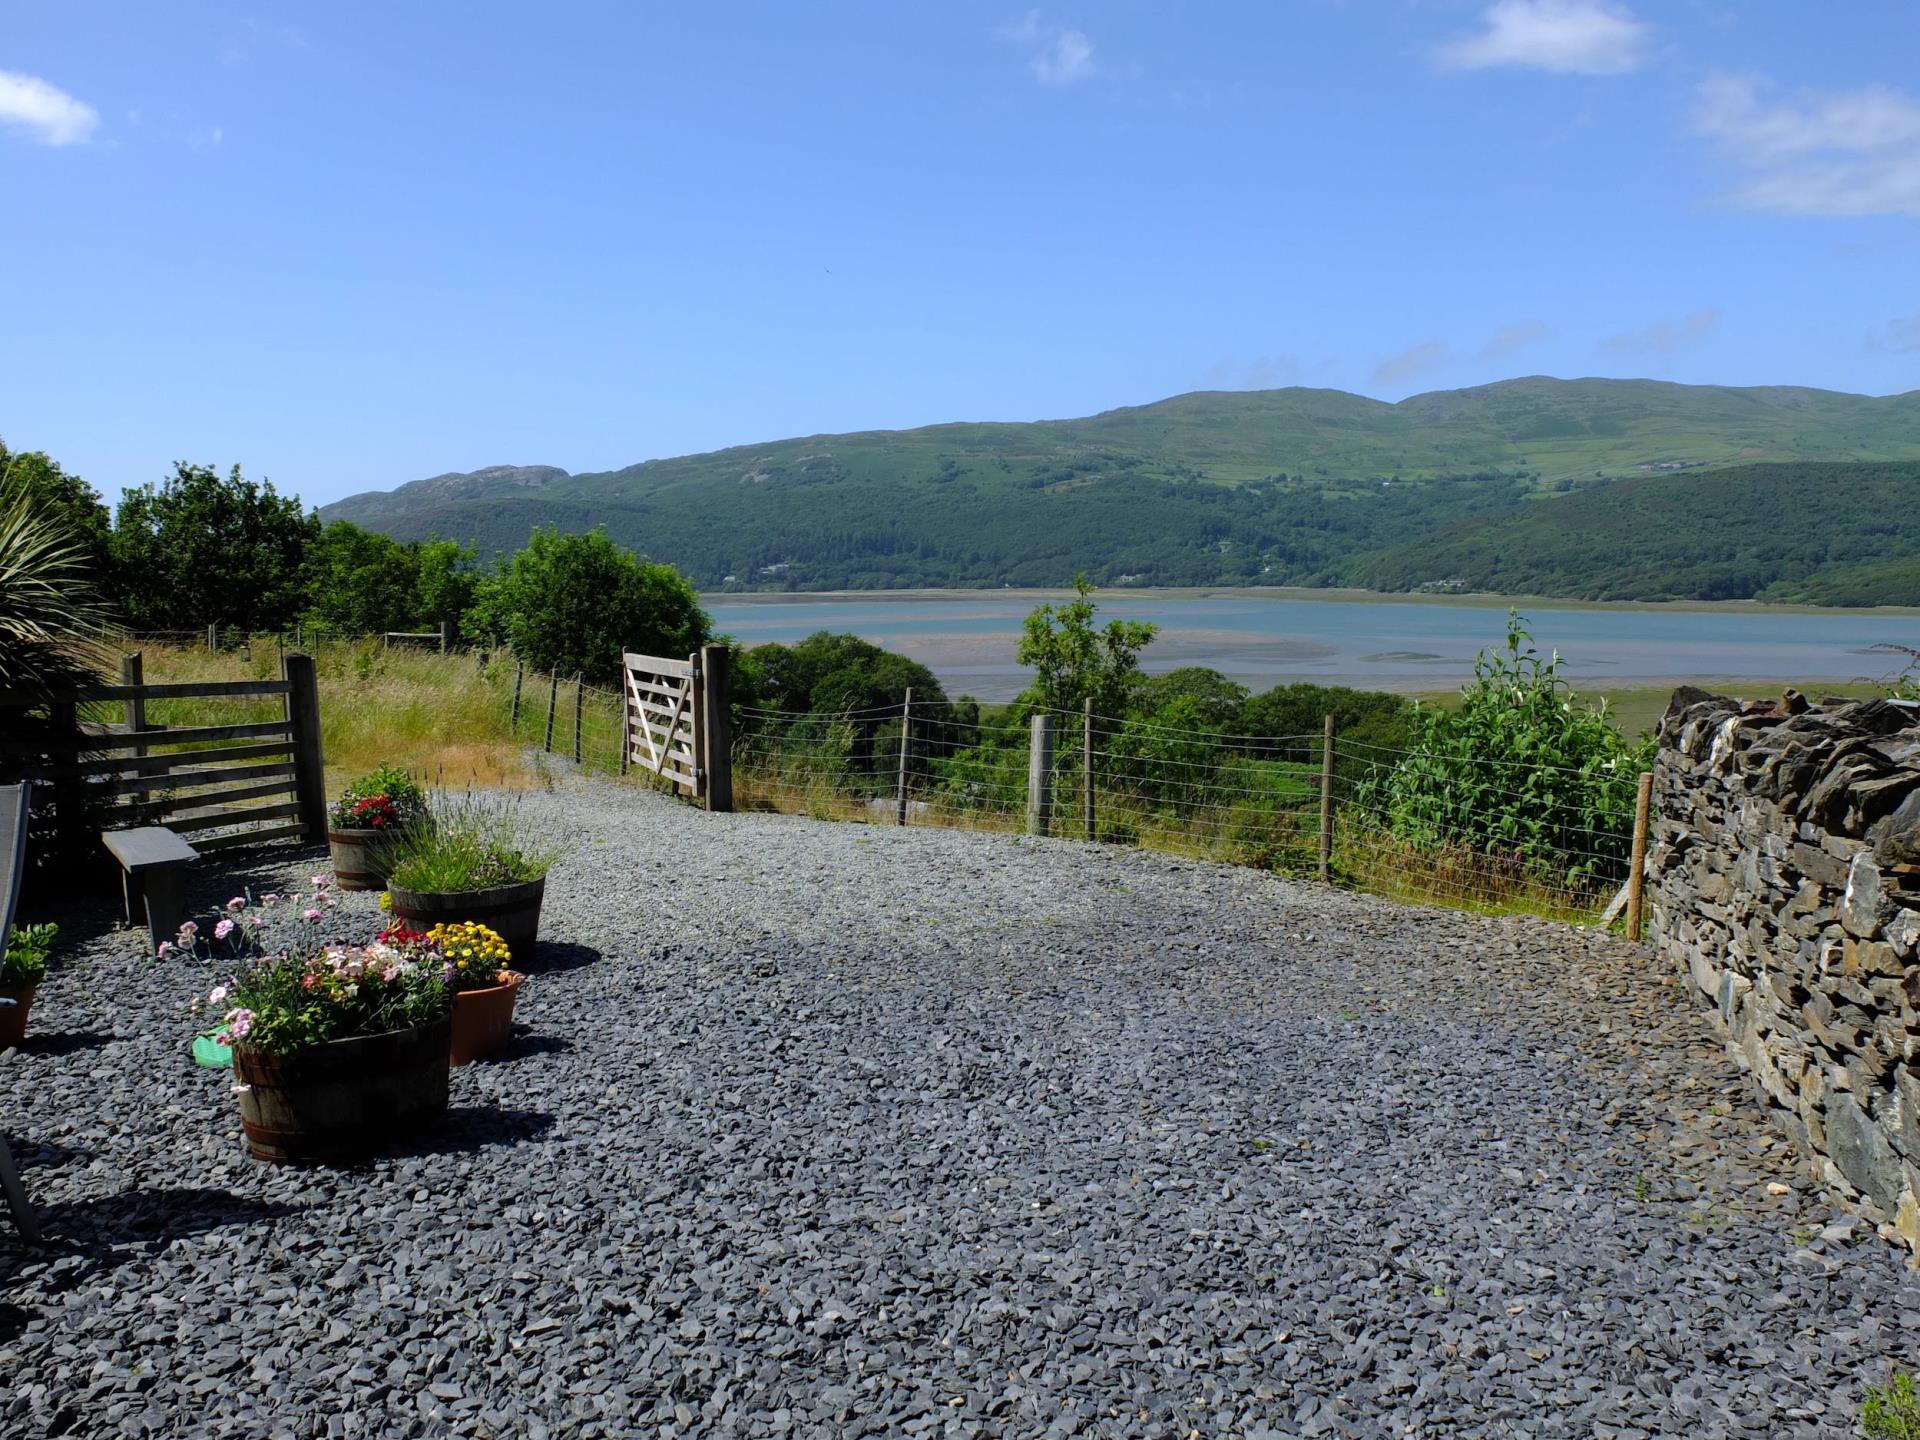 View of Mawddach Estuary from Little Haven